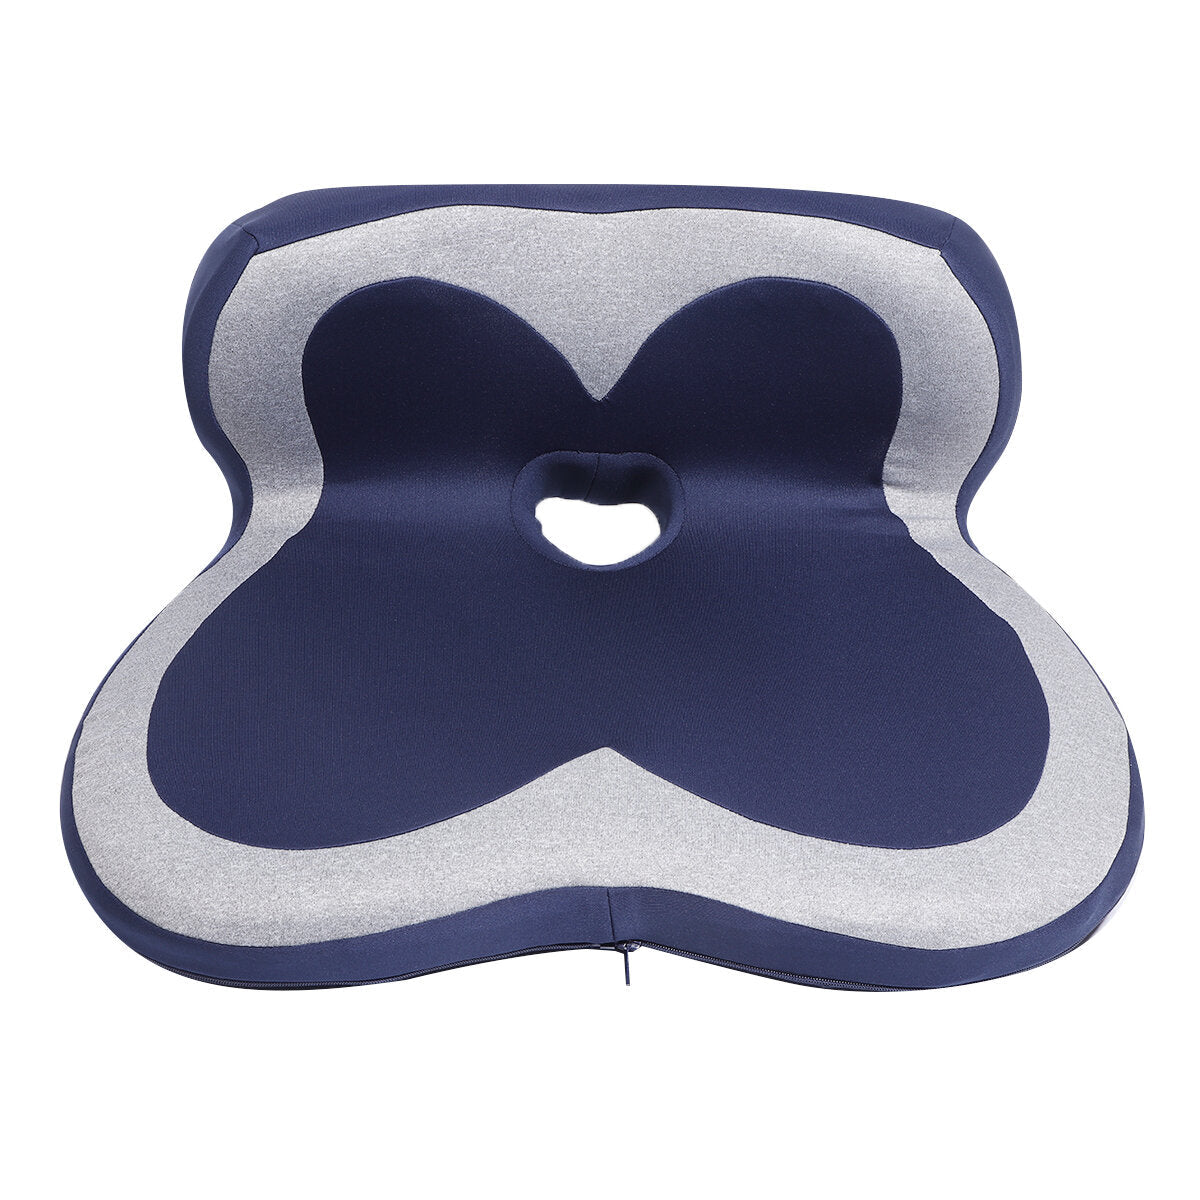 Memory Foam Seat Cushion Lumbar Back Support Orthoped Car Office Pain Relief Pad